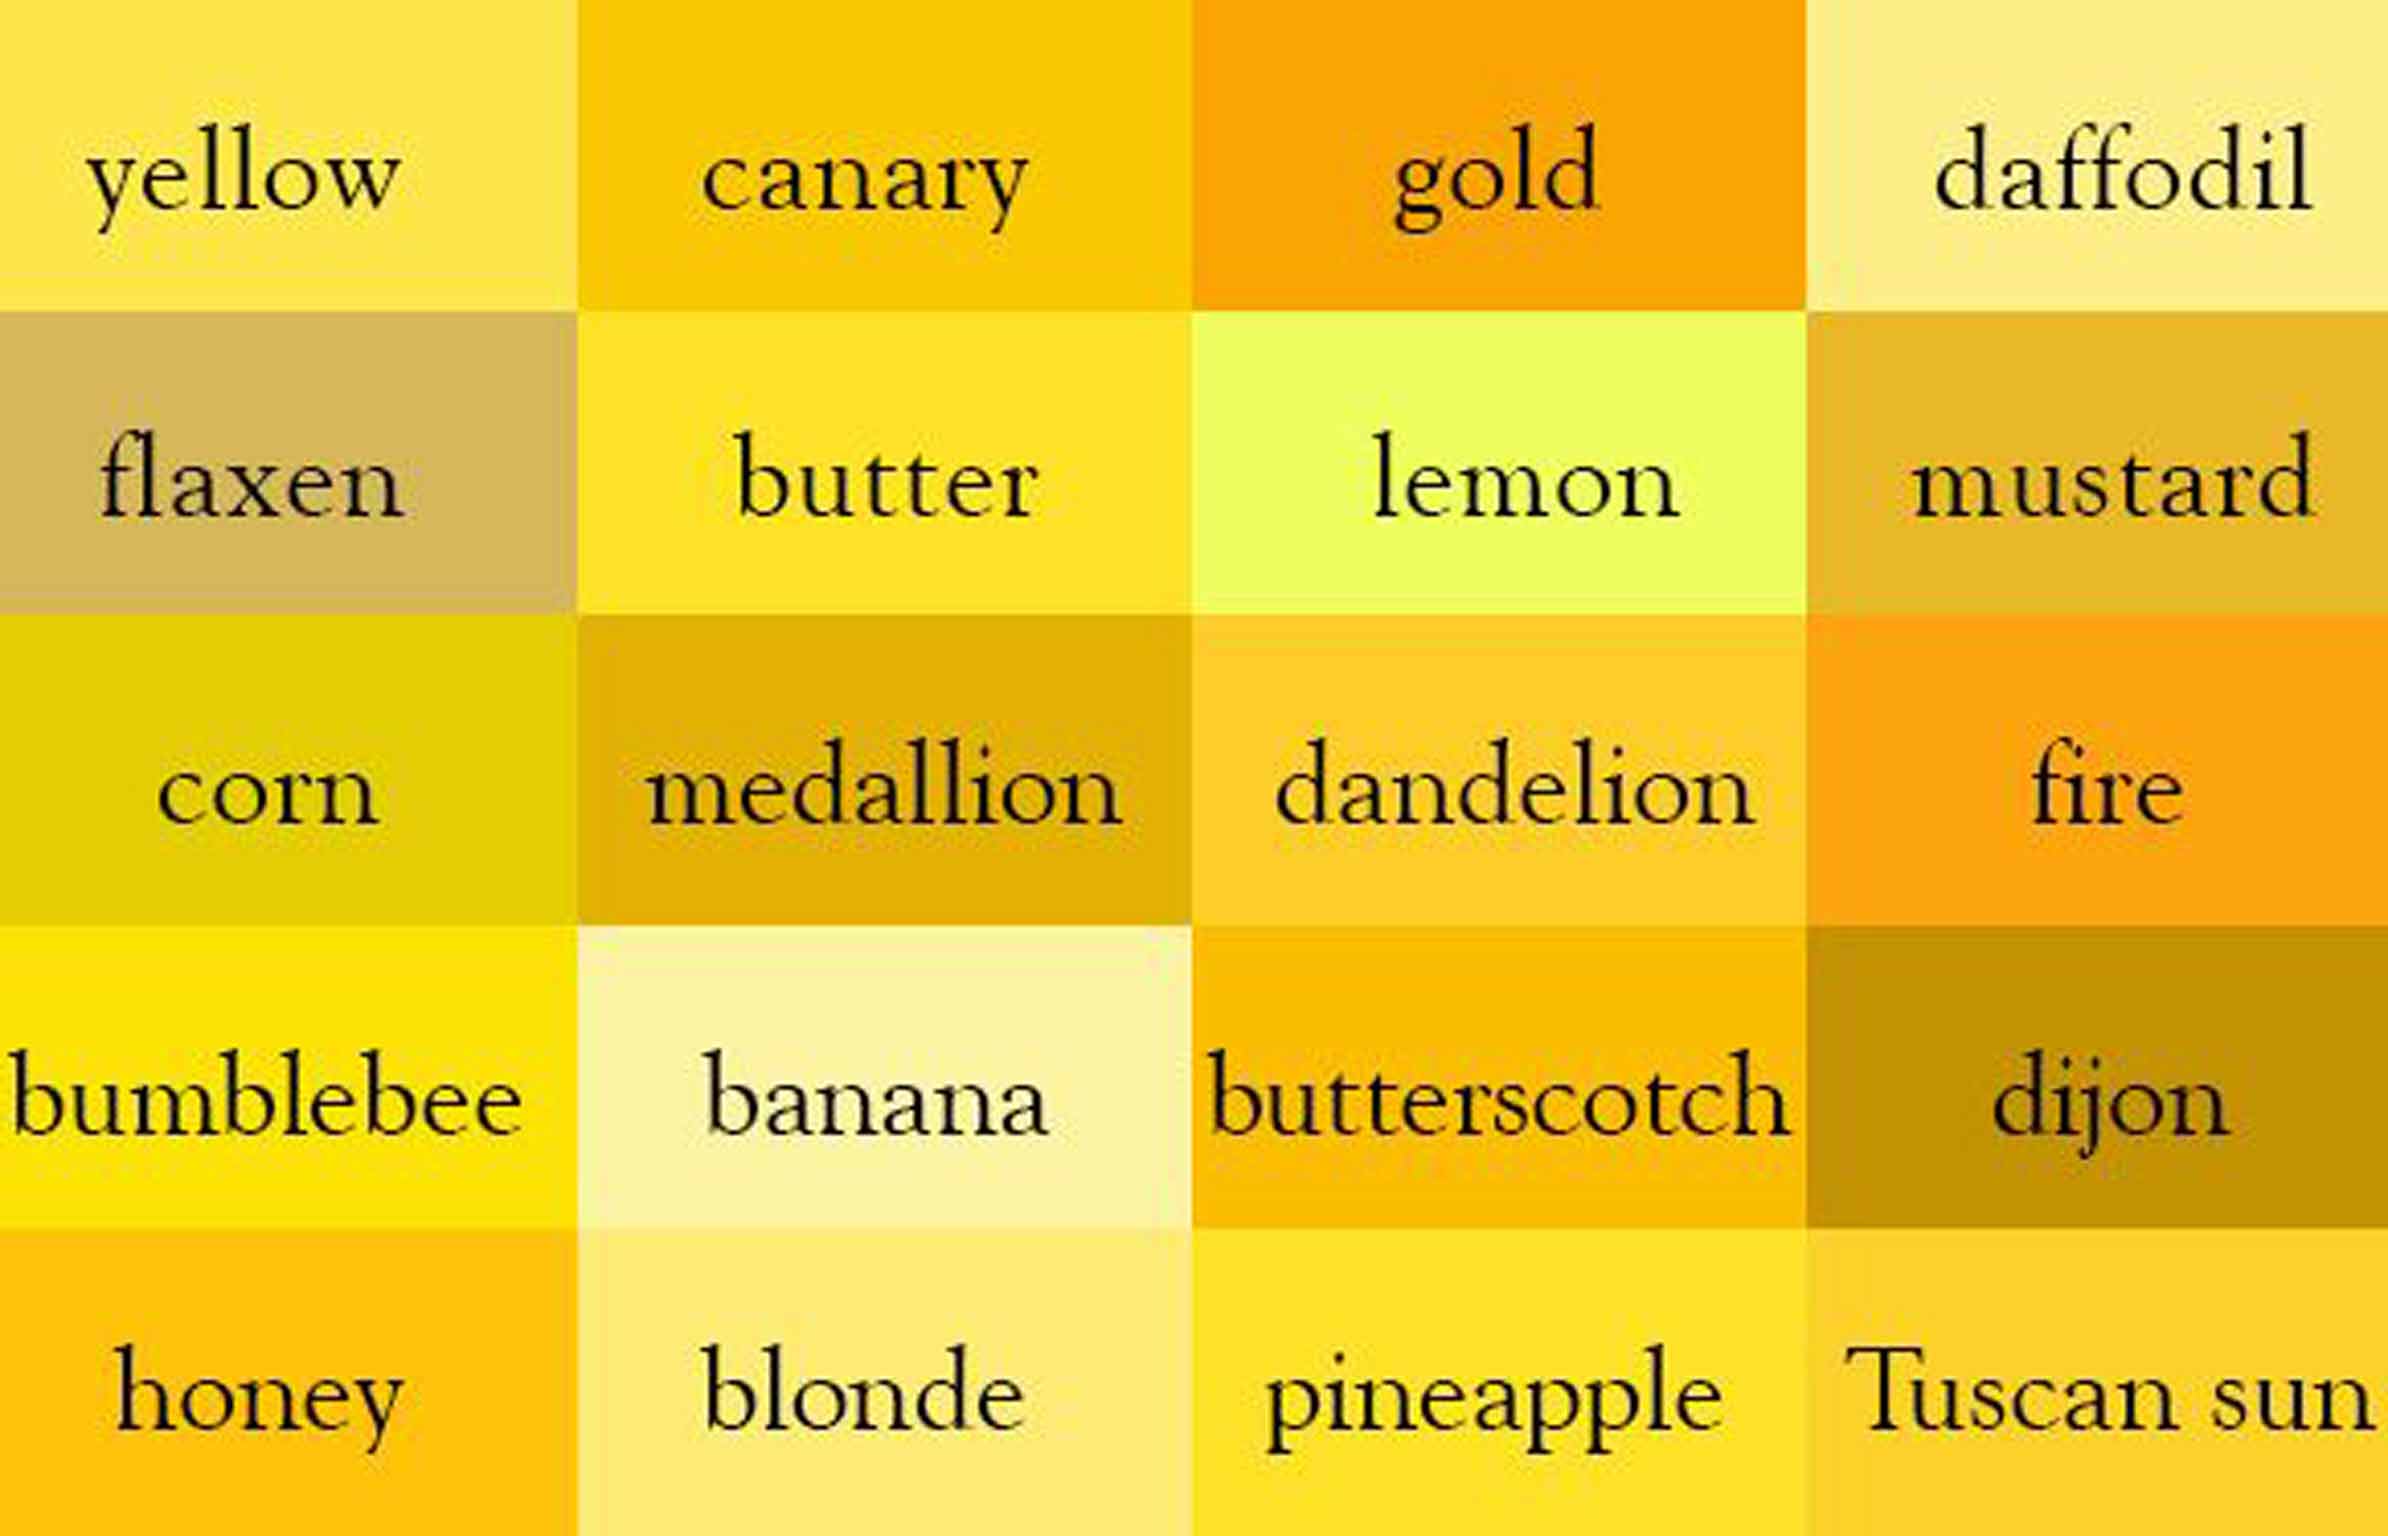 The world's first thesaurus of colour shades: What kind of yellow